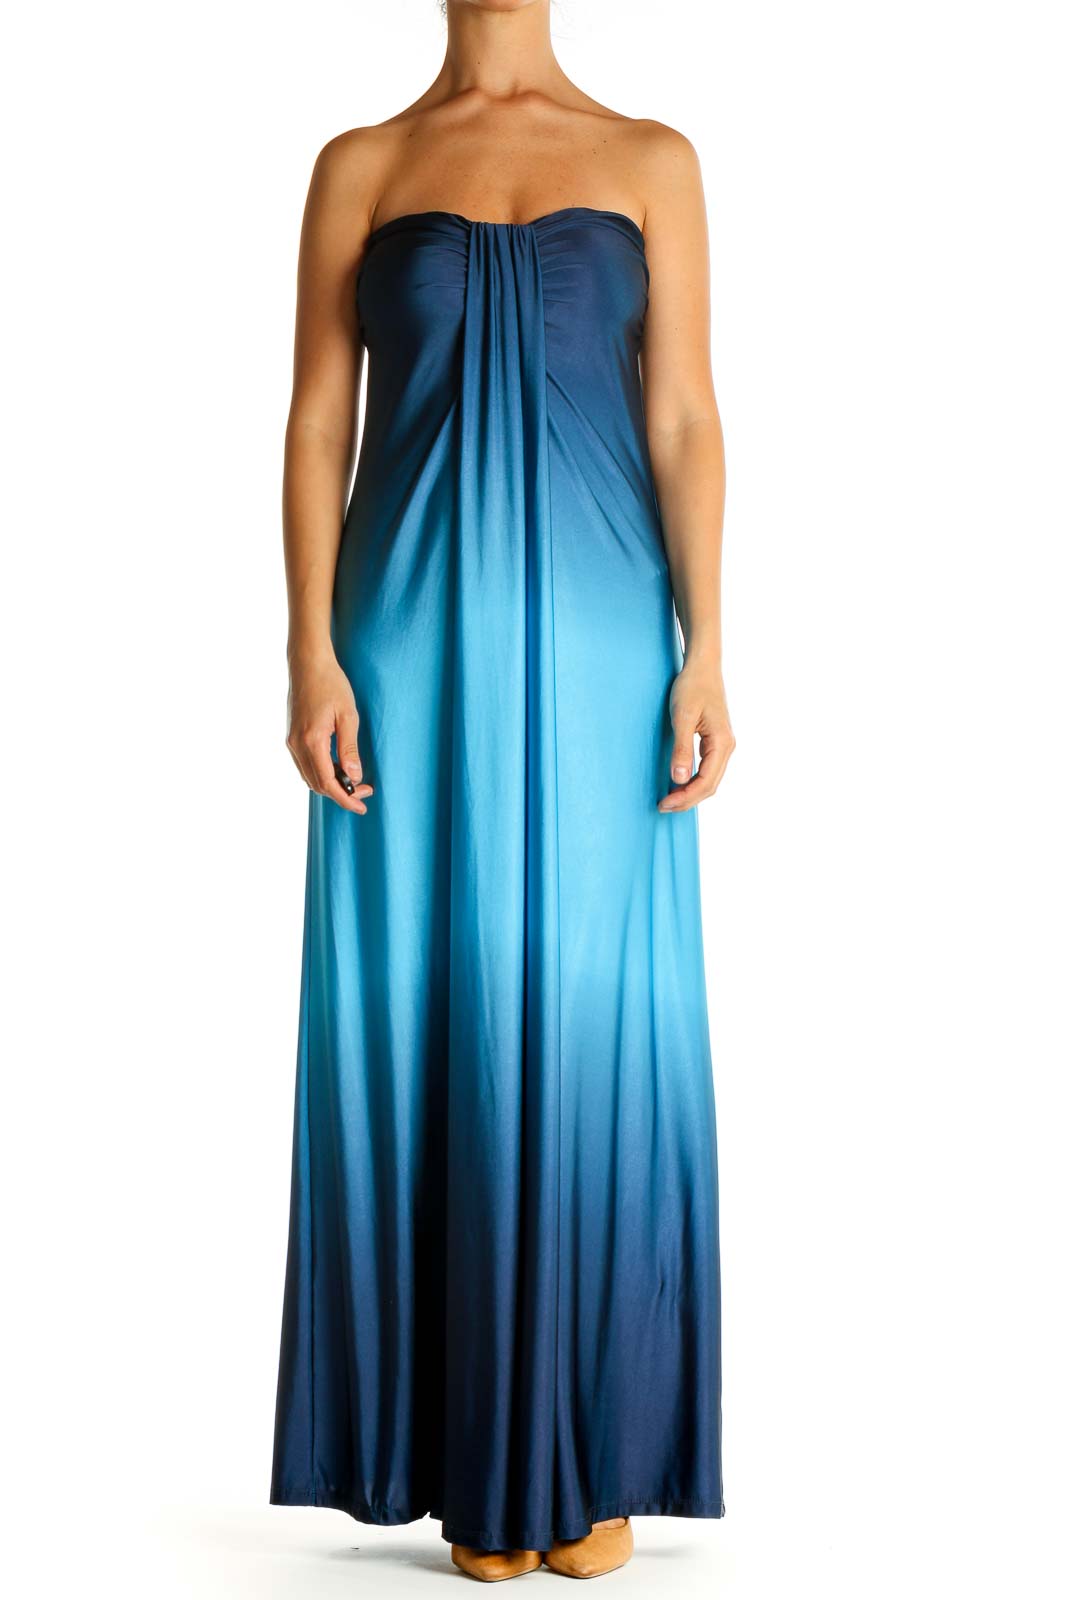 Blue Tie And Dye Classic Column Dress Front